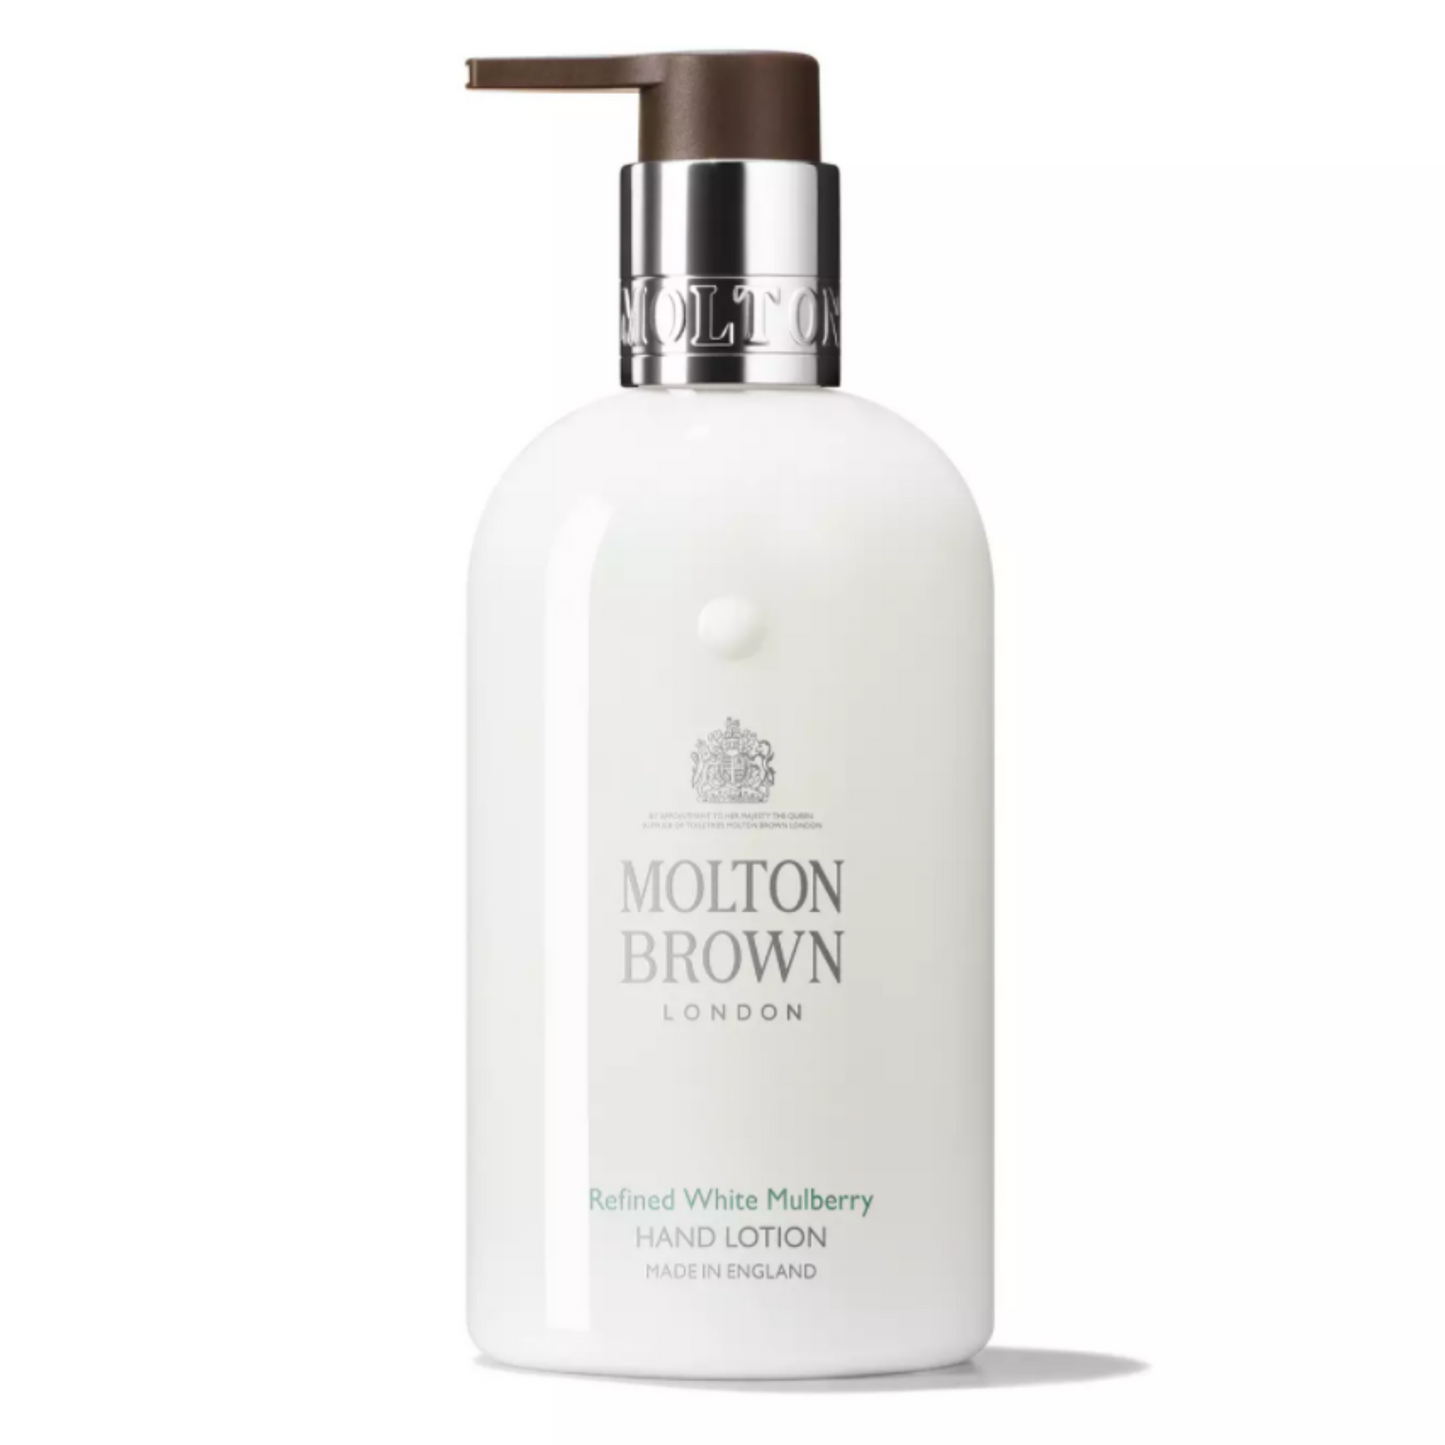 Primary image of Refined White Mulberry Hand Lotion